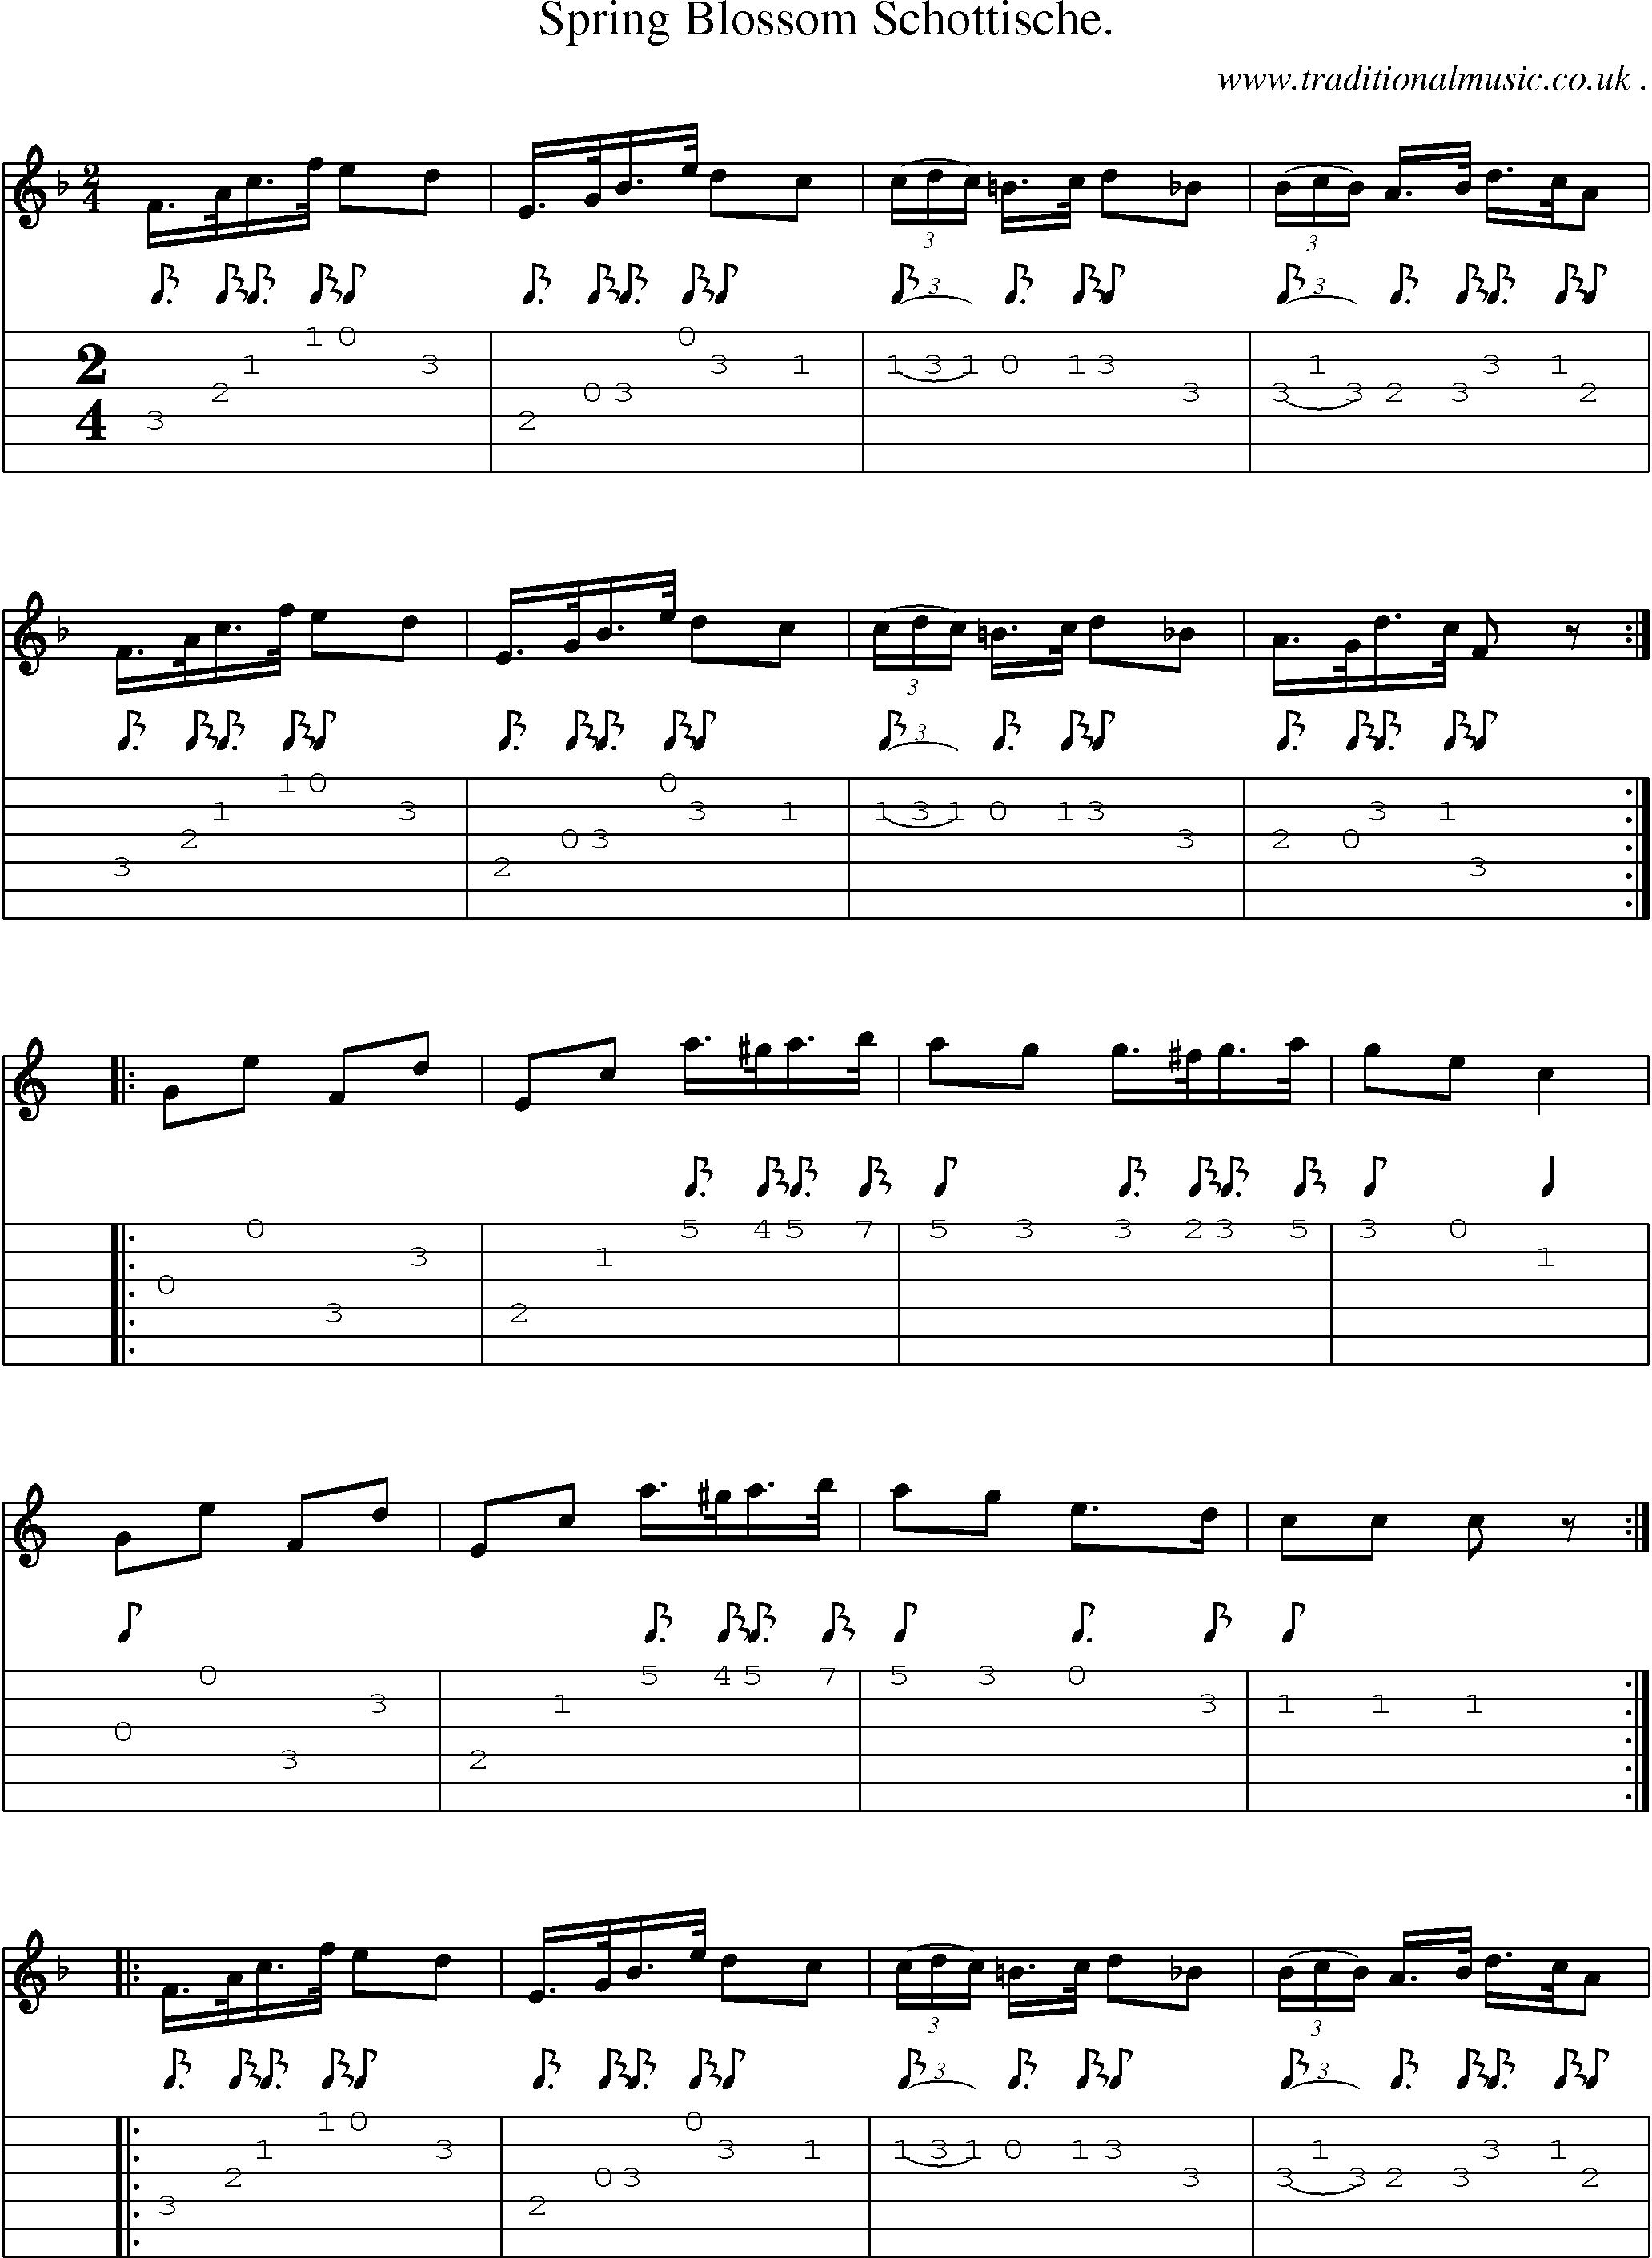 Sheet-Music and Guitar Tabs for Spring Blossom Schottische